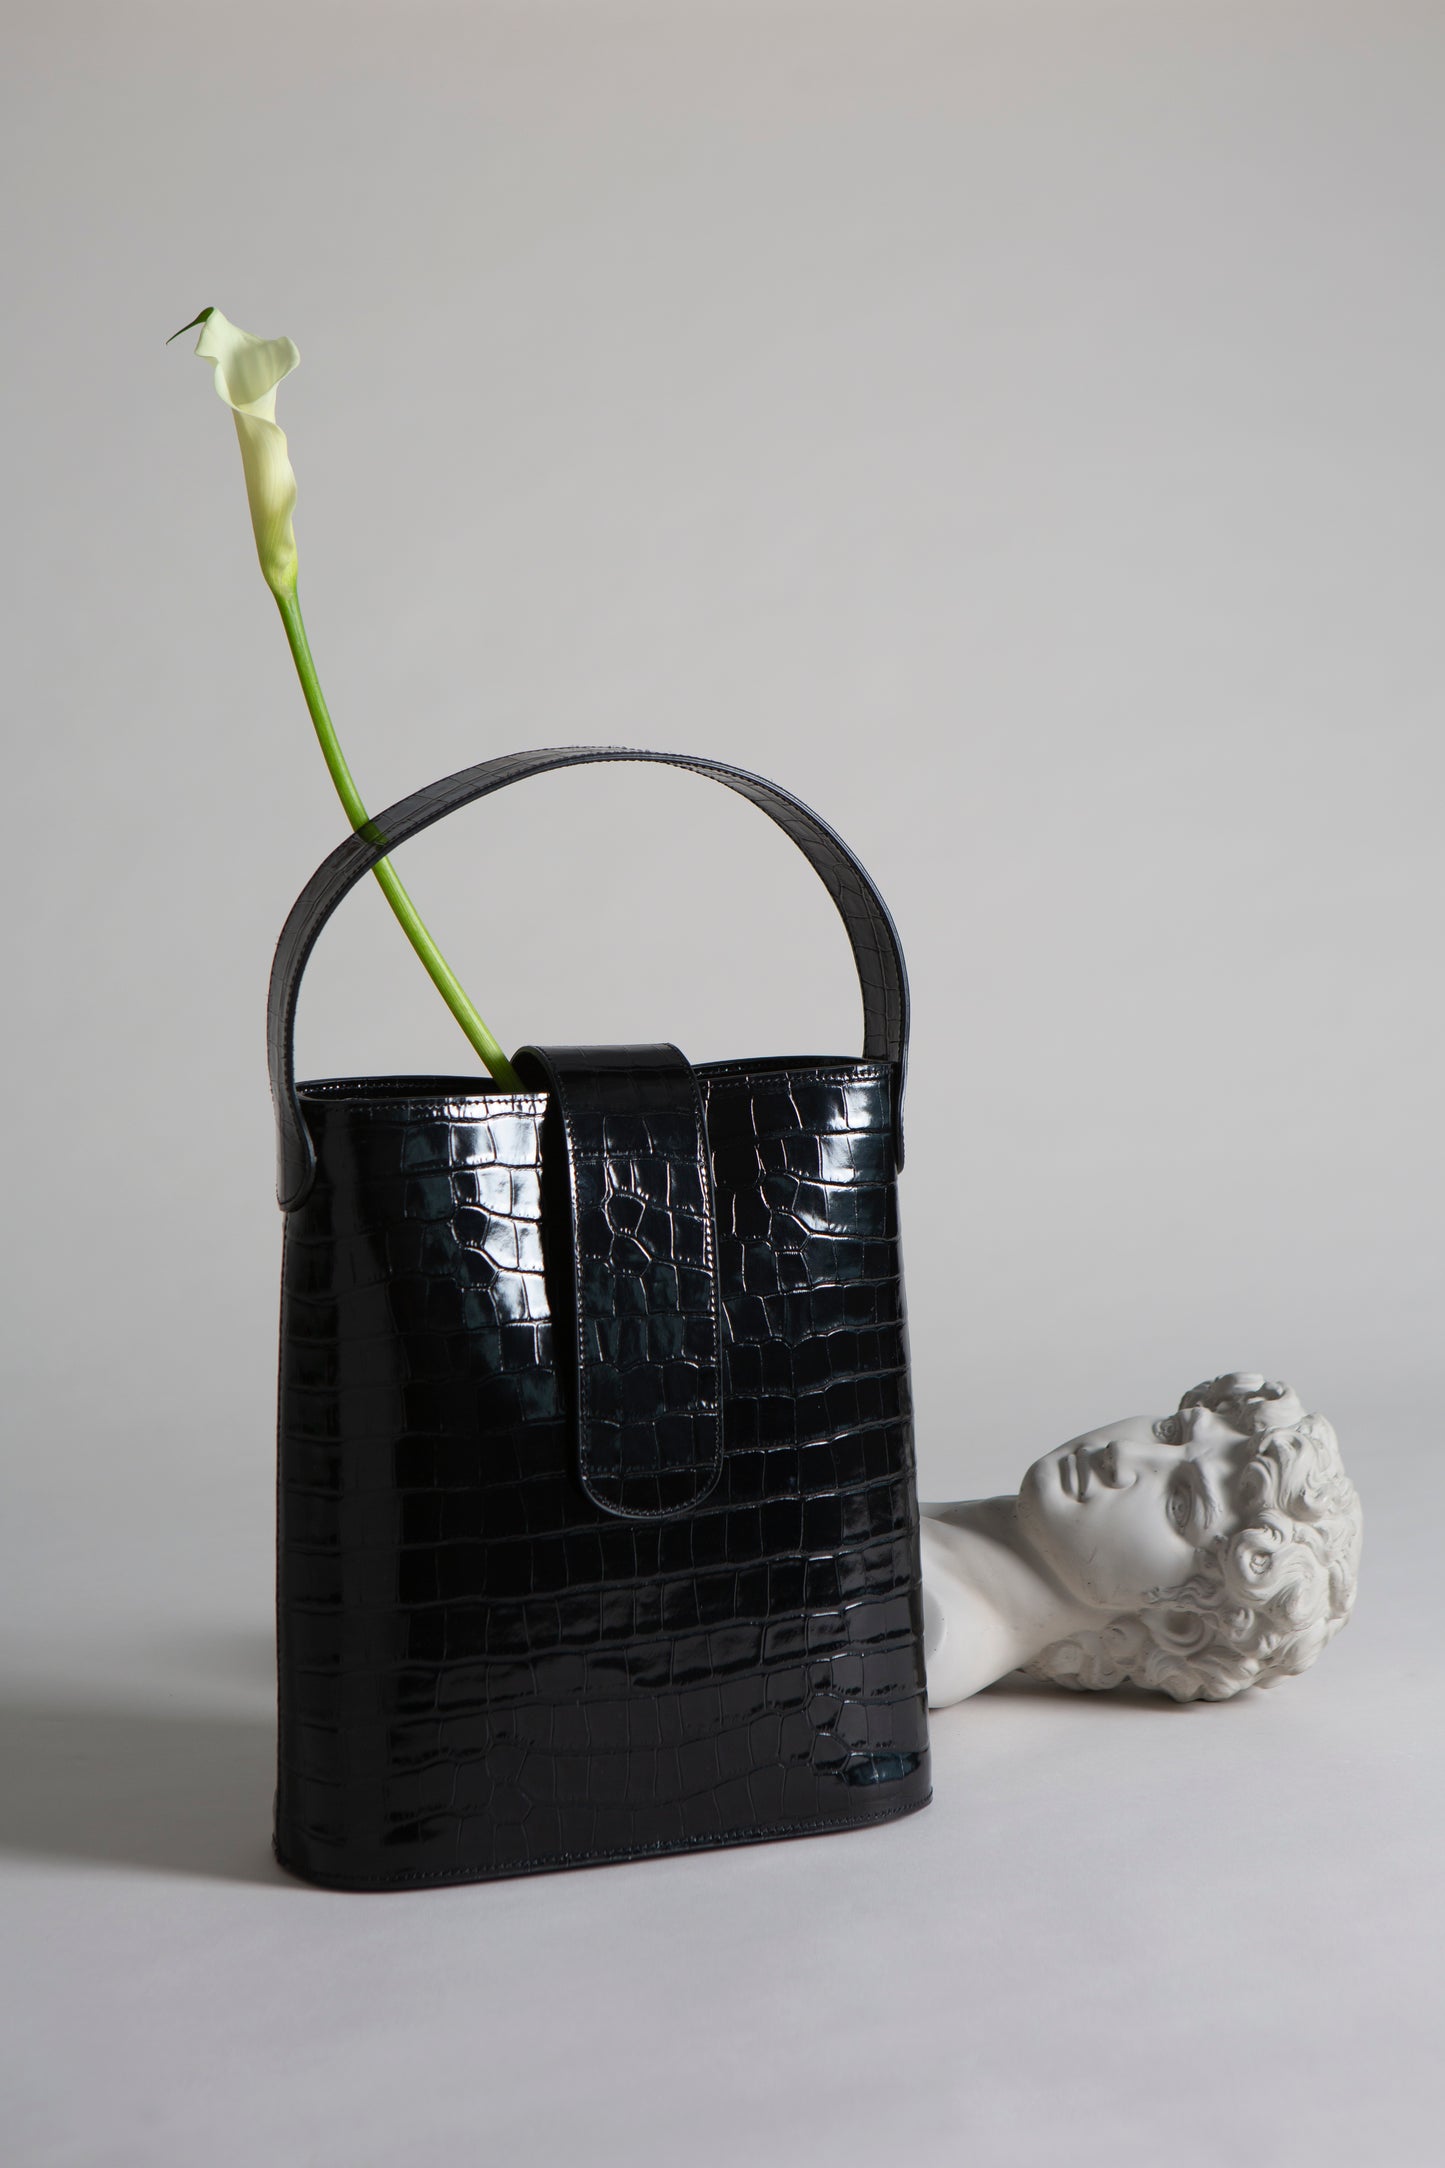 CNicol Black Croc Leather Holly Maxi Bag in front of Marble Statue Bust on its Side with Single Flower Inside